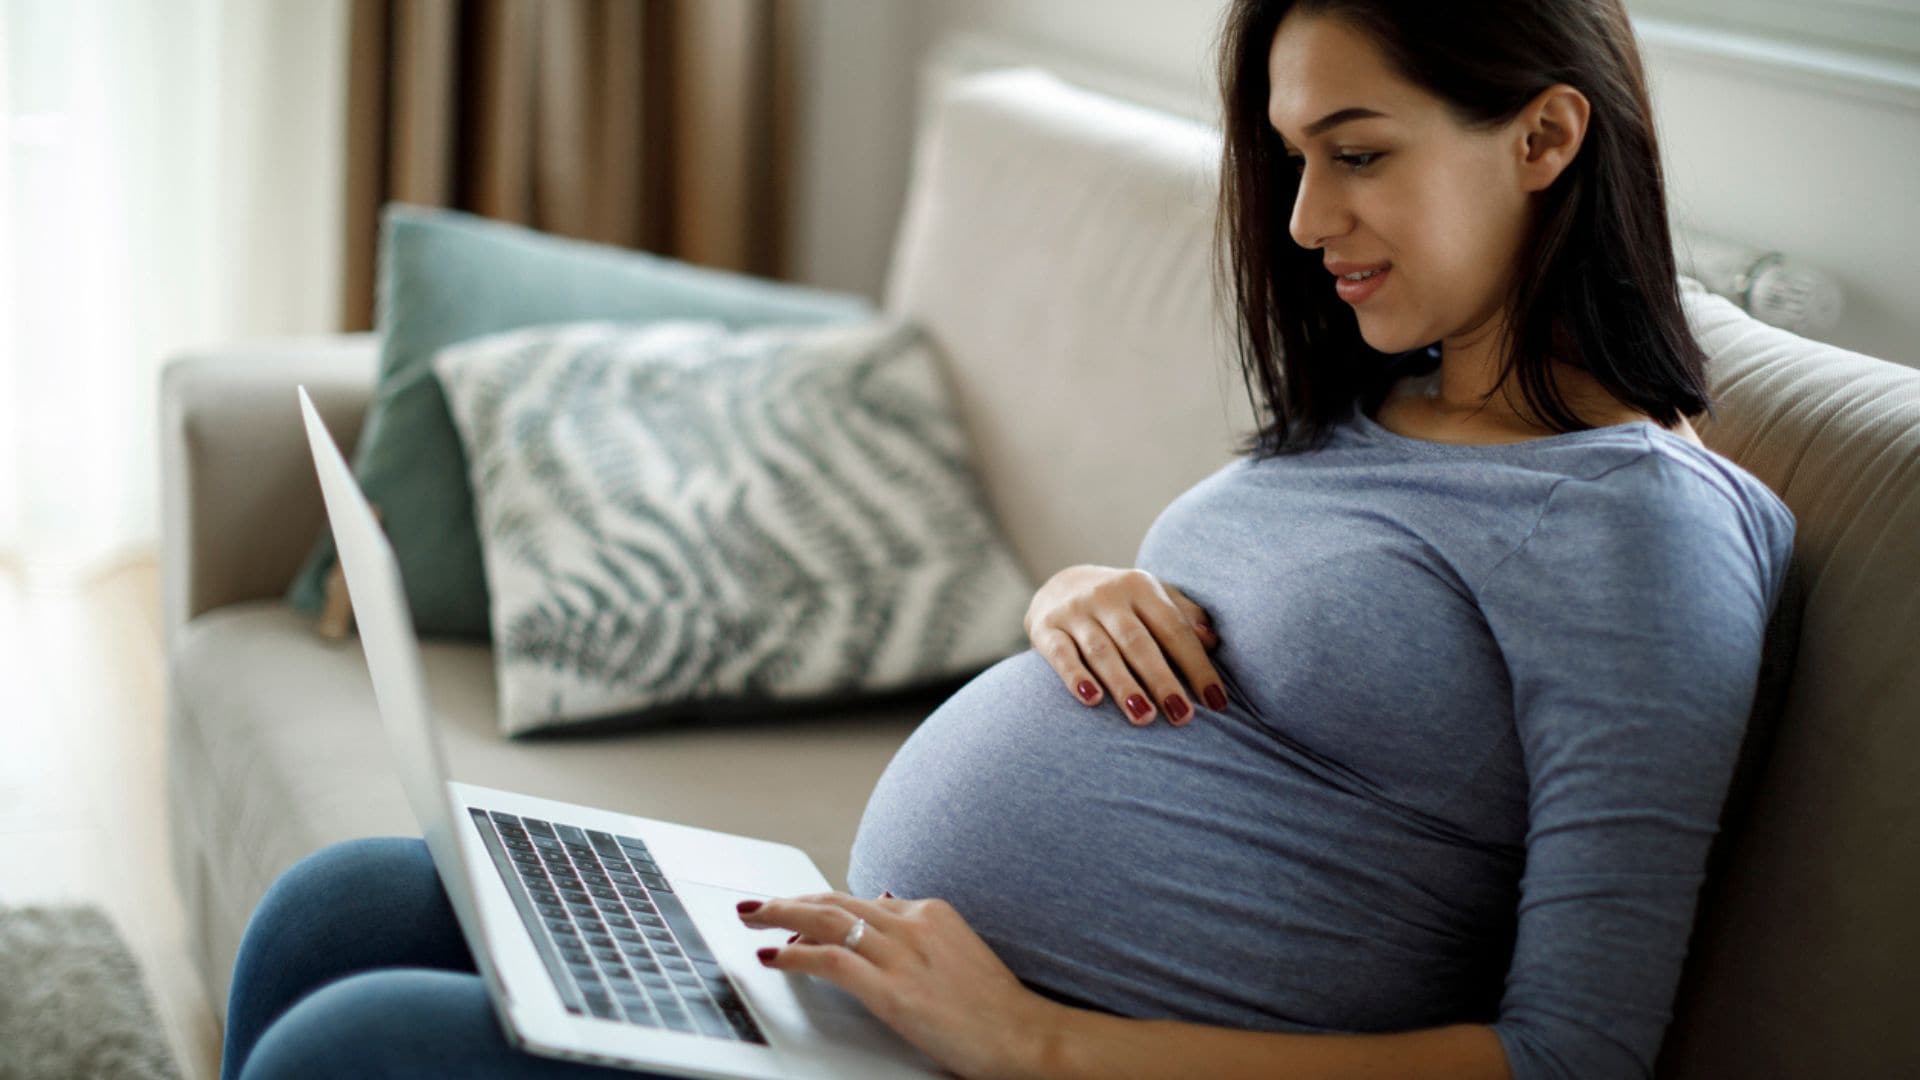 A pregnant person looking up information on a computer